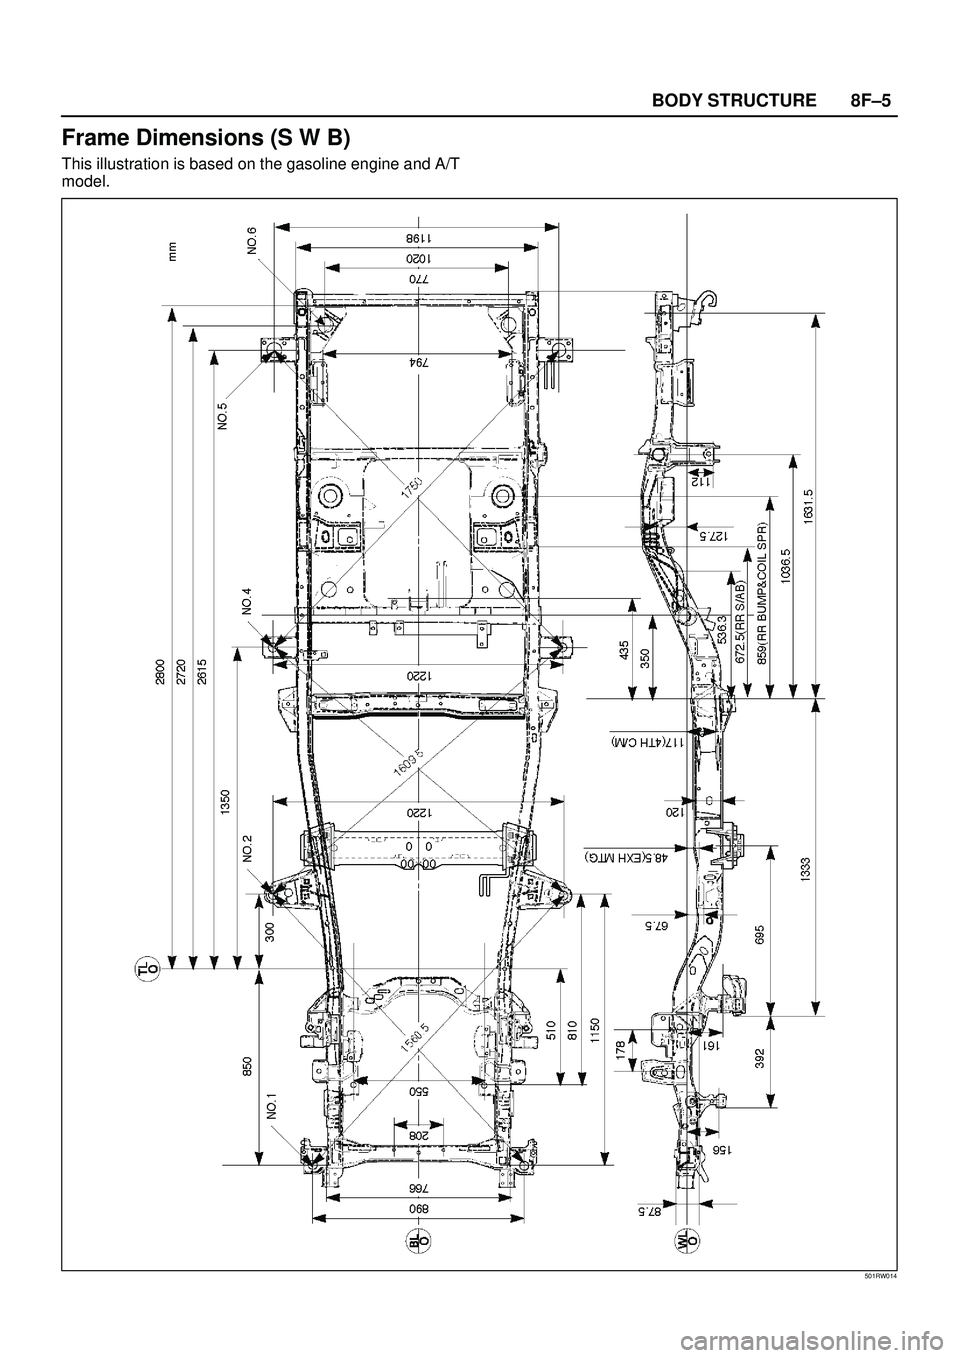 ISUZU TROOPER 1998  Service Repair Manual 8F±5 BODY STRUCTURE
Frame Dimensions (S W B)
This illustration is based on the gasoline engine and A/T
model.
501RW014 